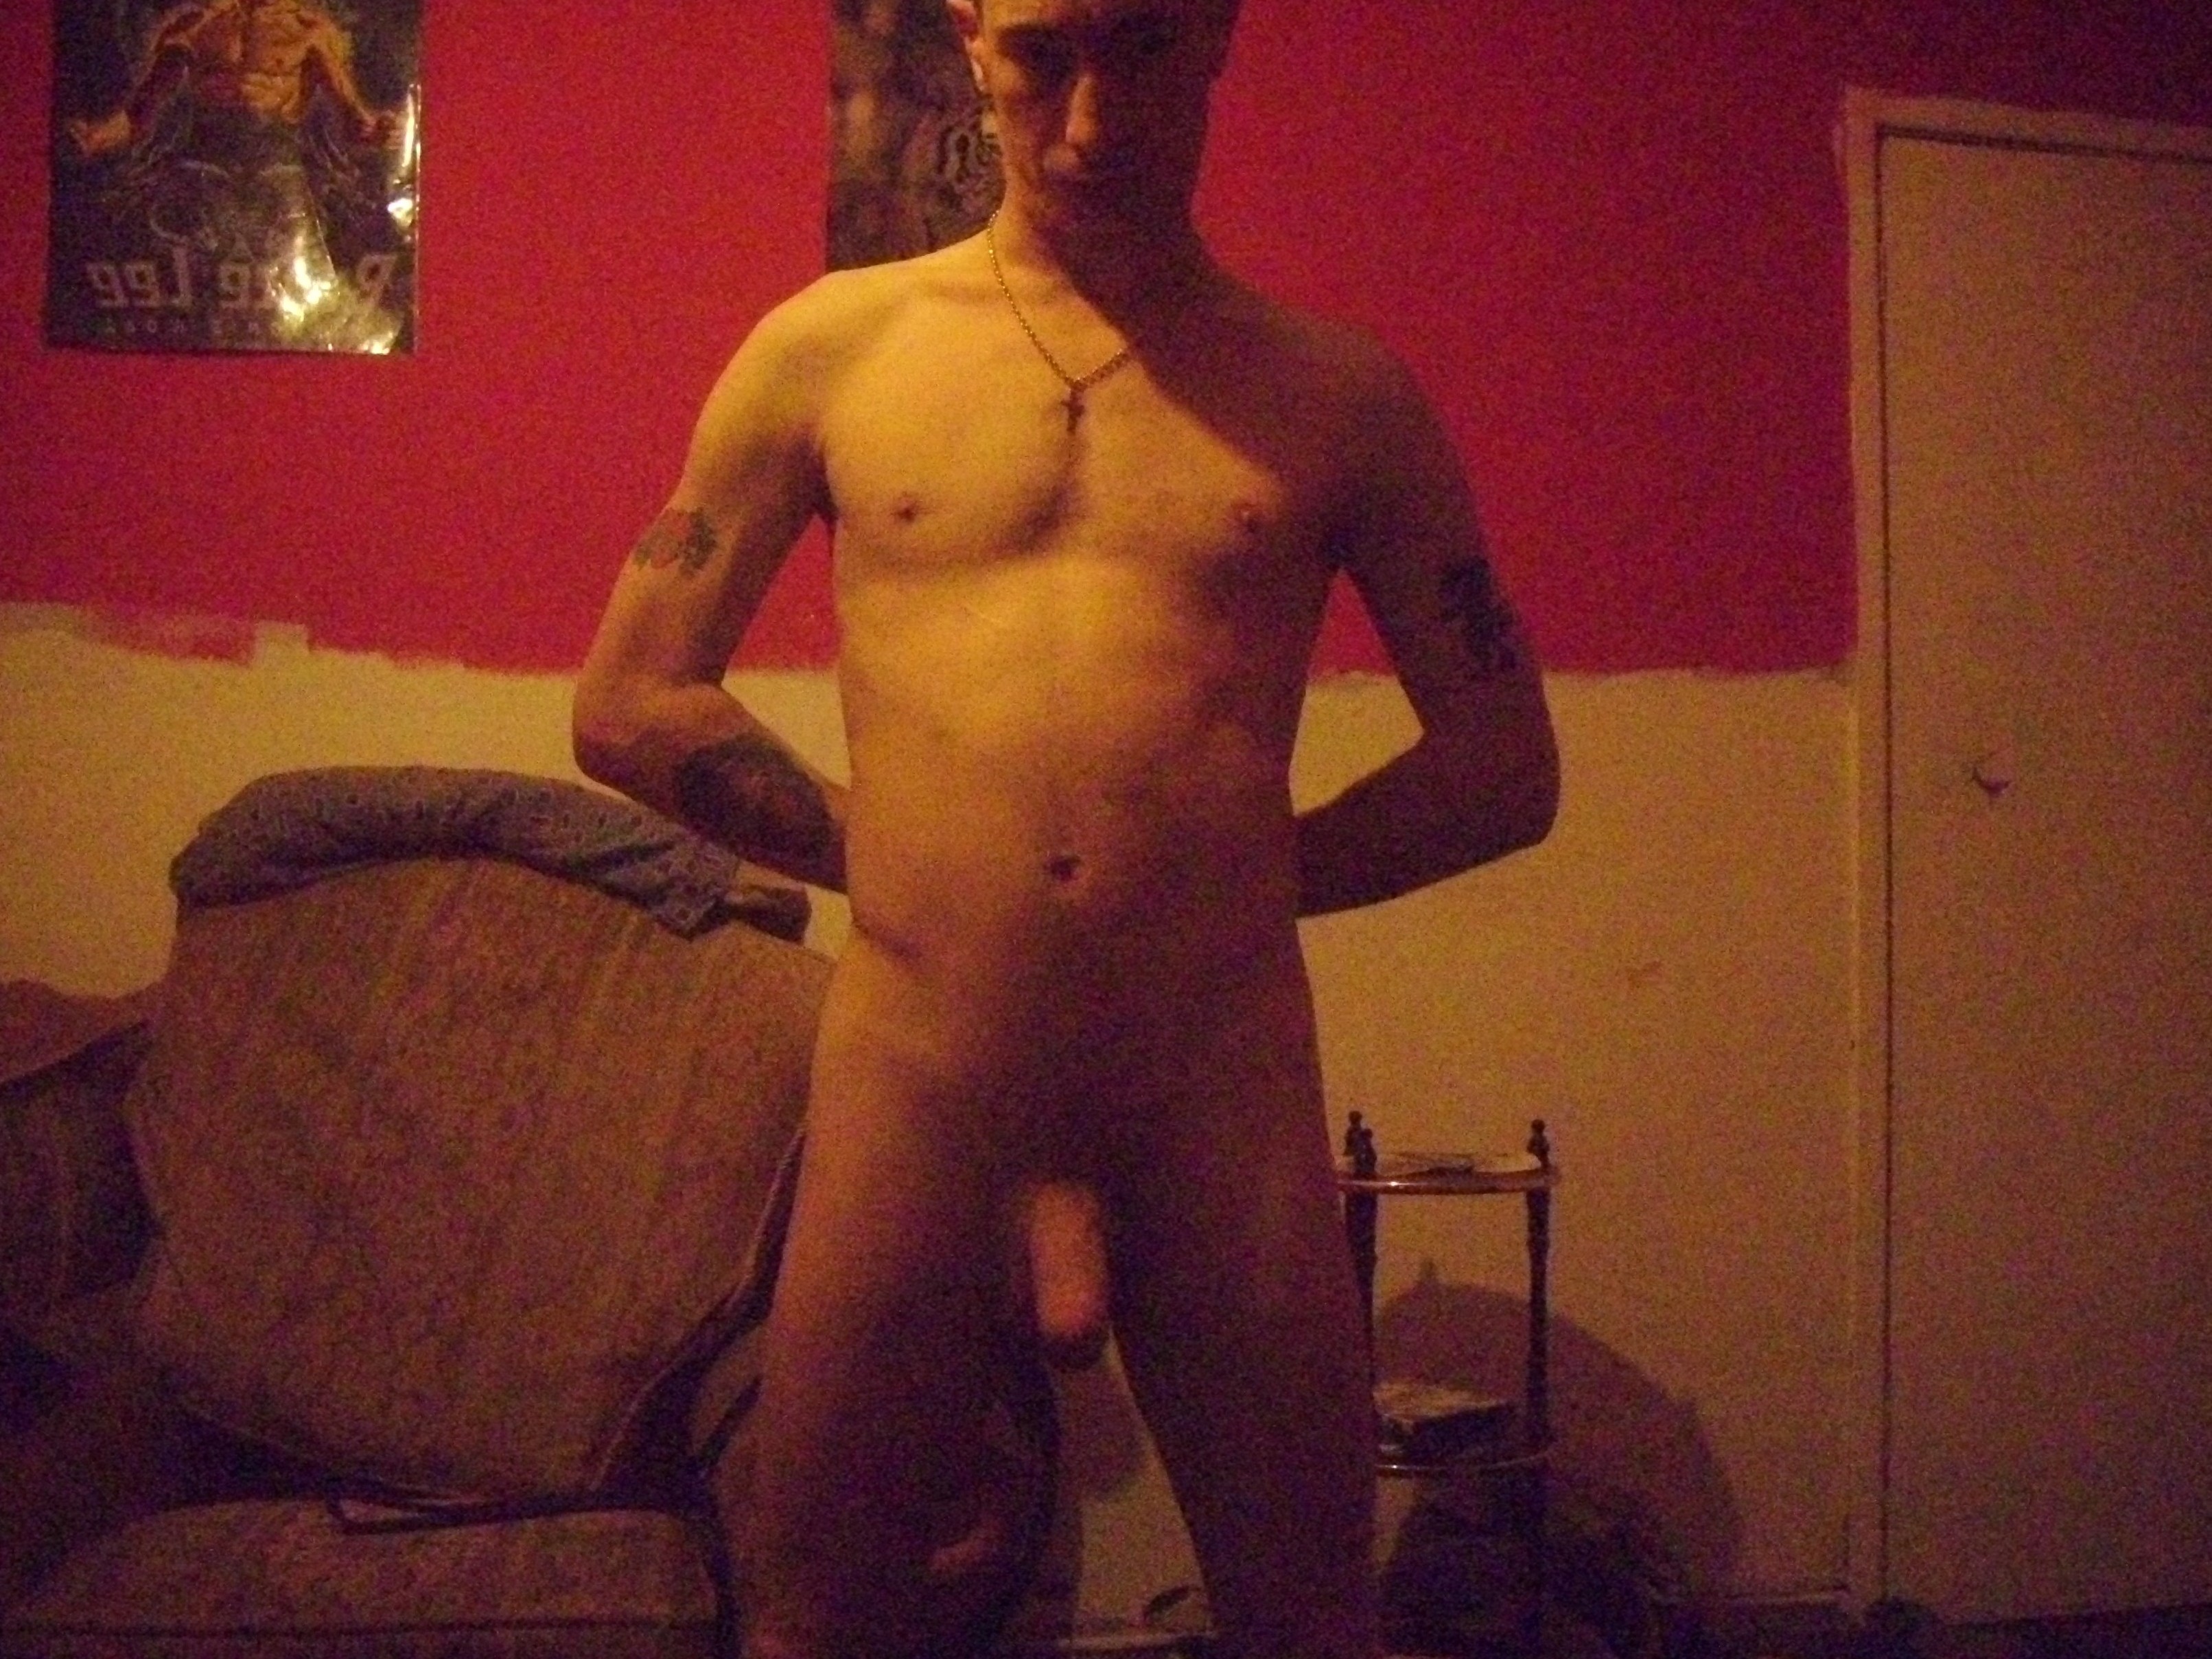 me naked 